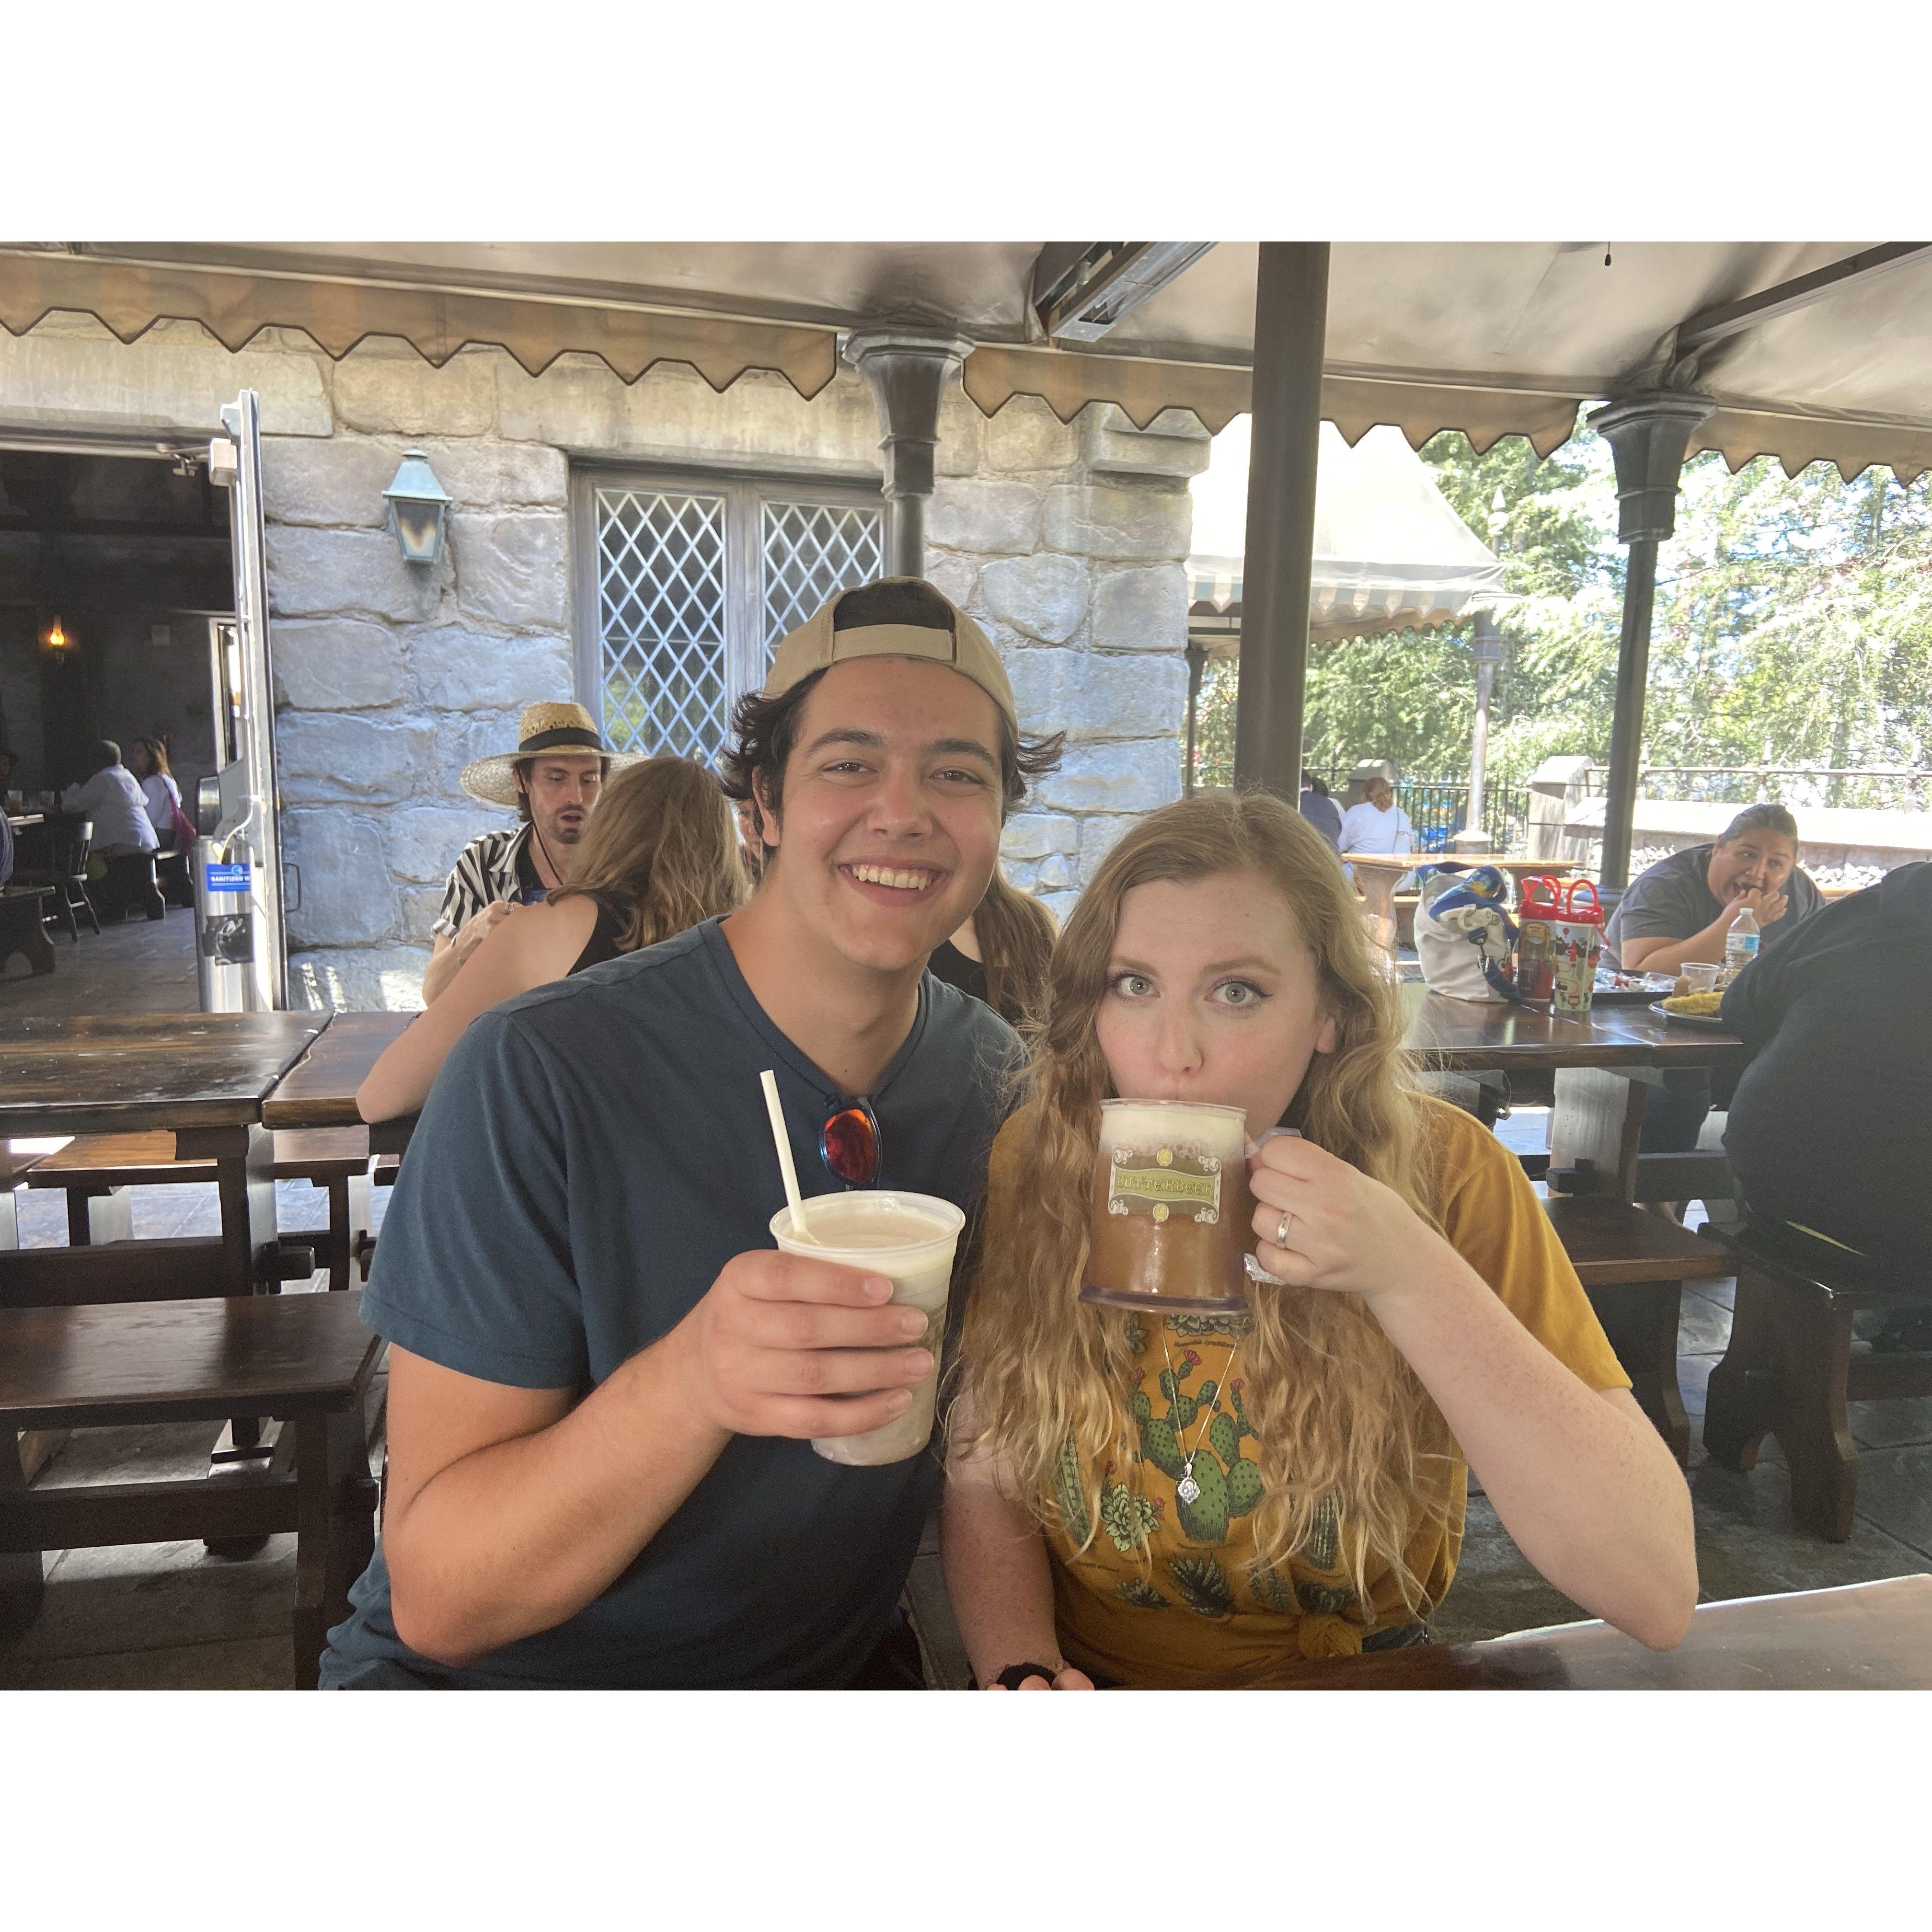 Chugging butterbeers in at Universal Studios